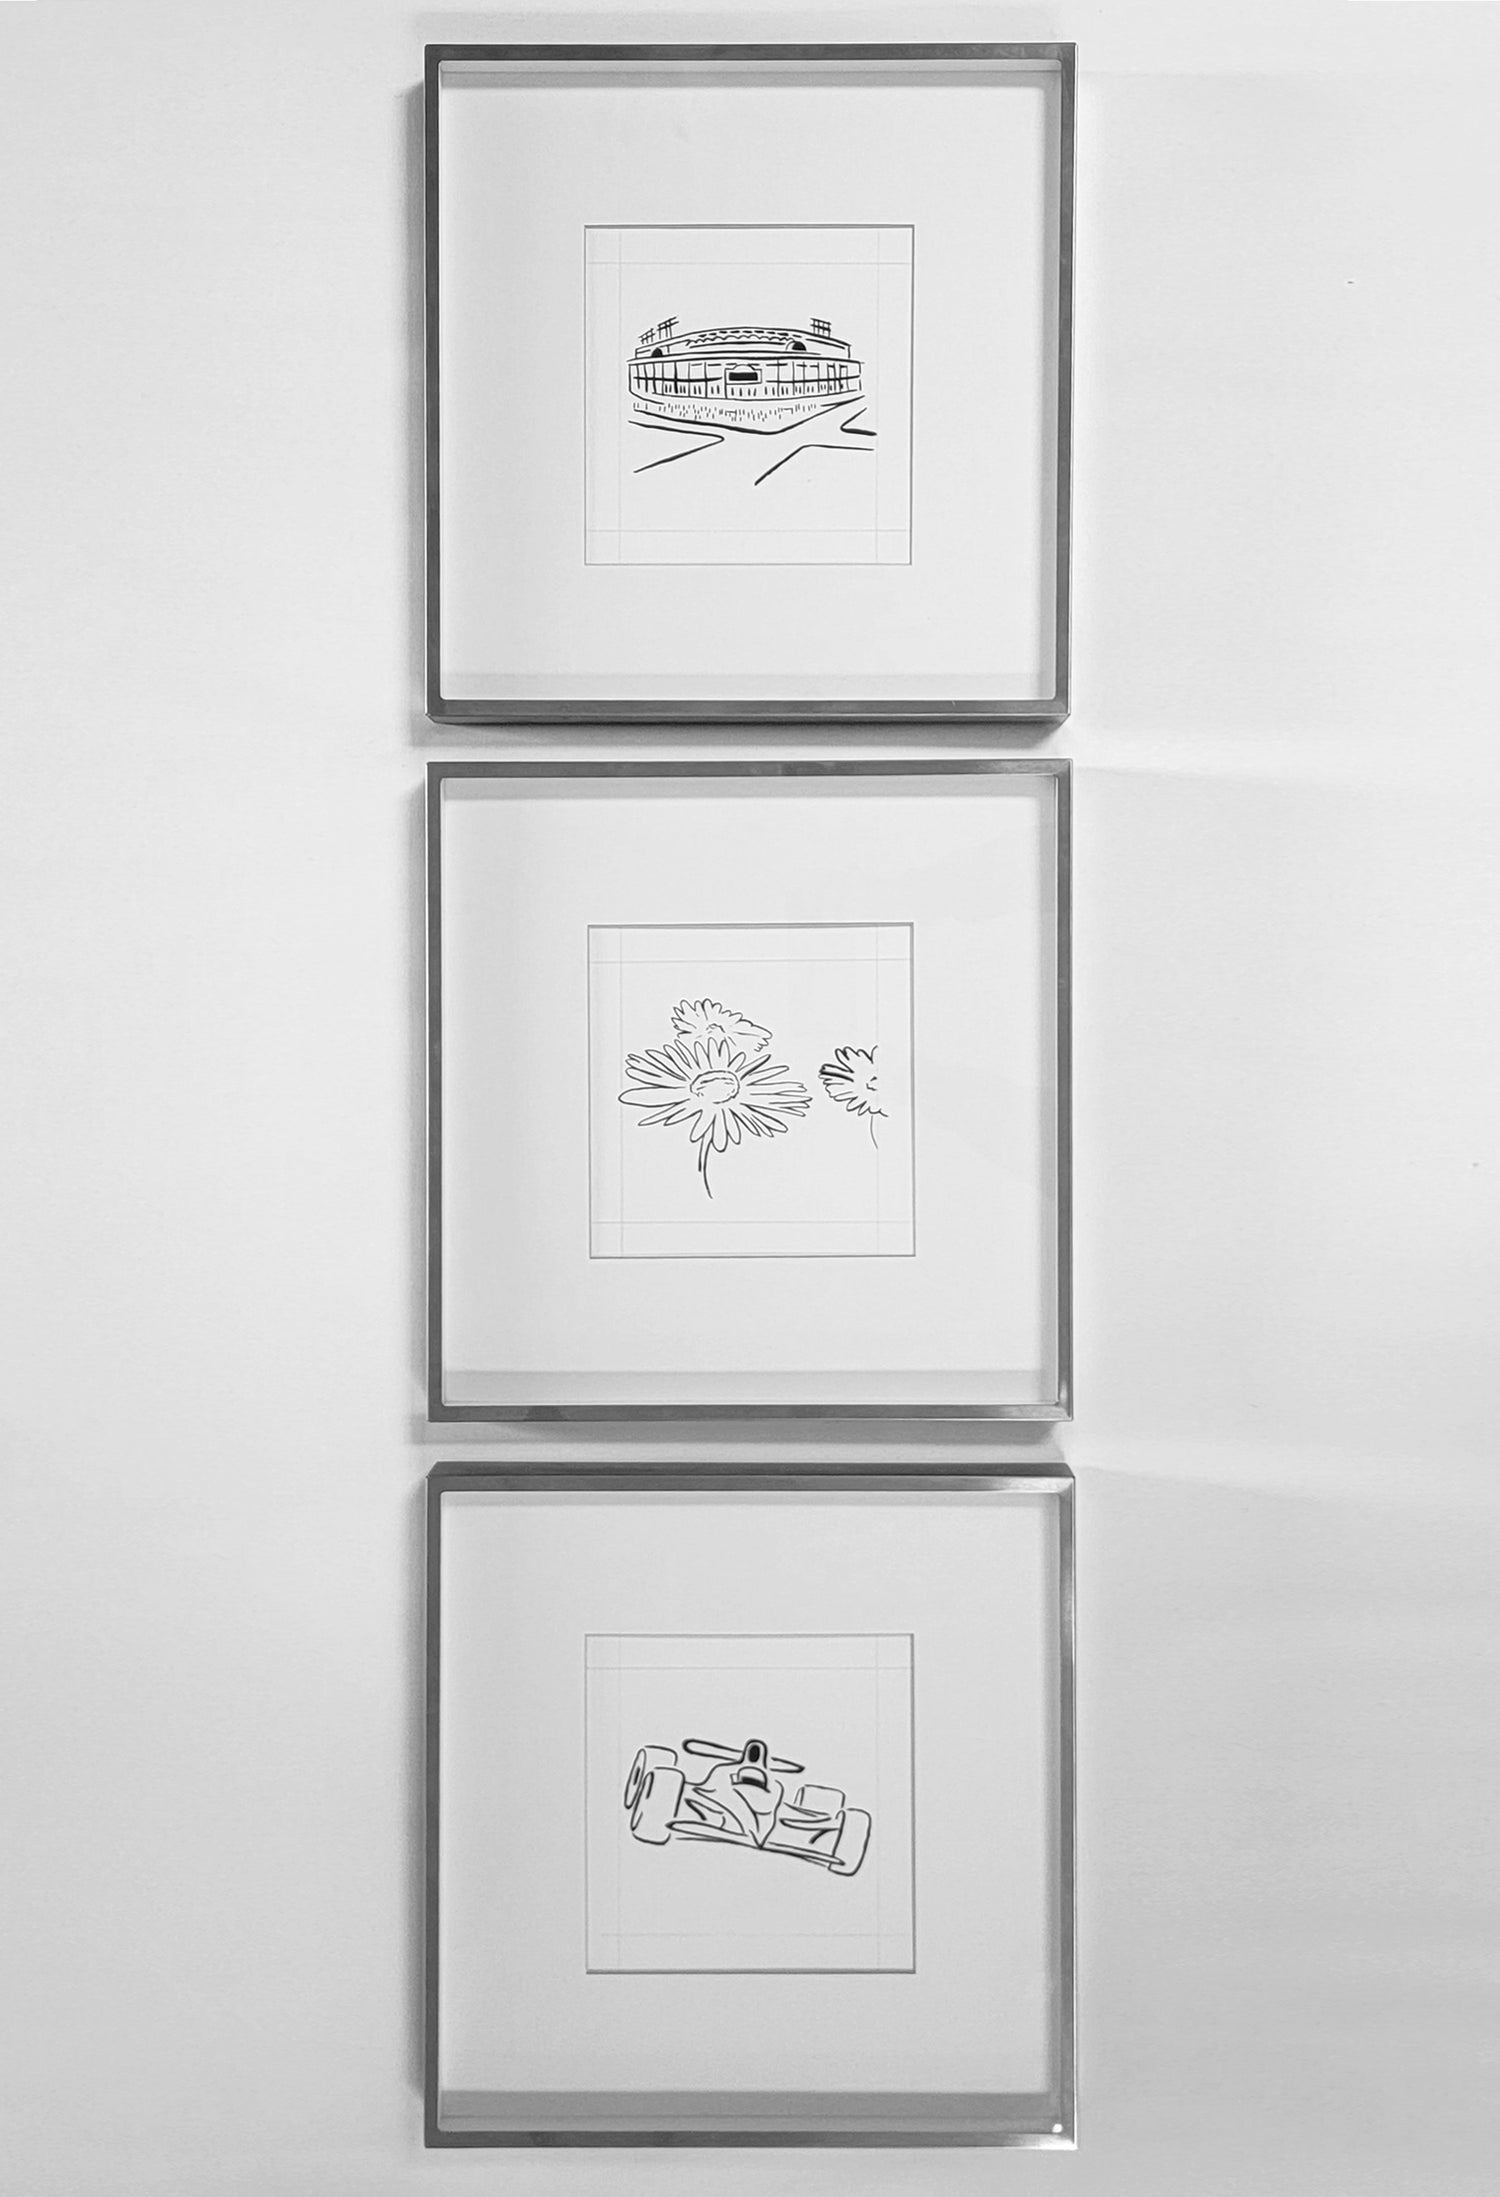 A set of three framed drawings hanging vertically on the wall